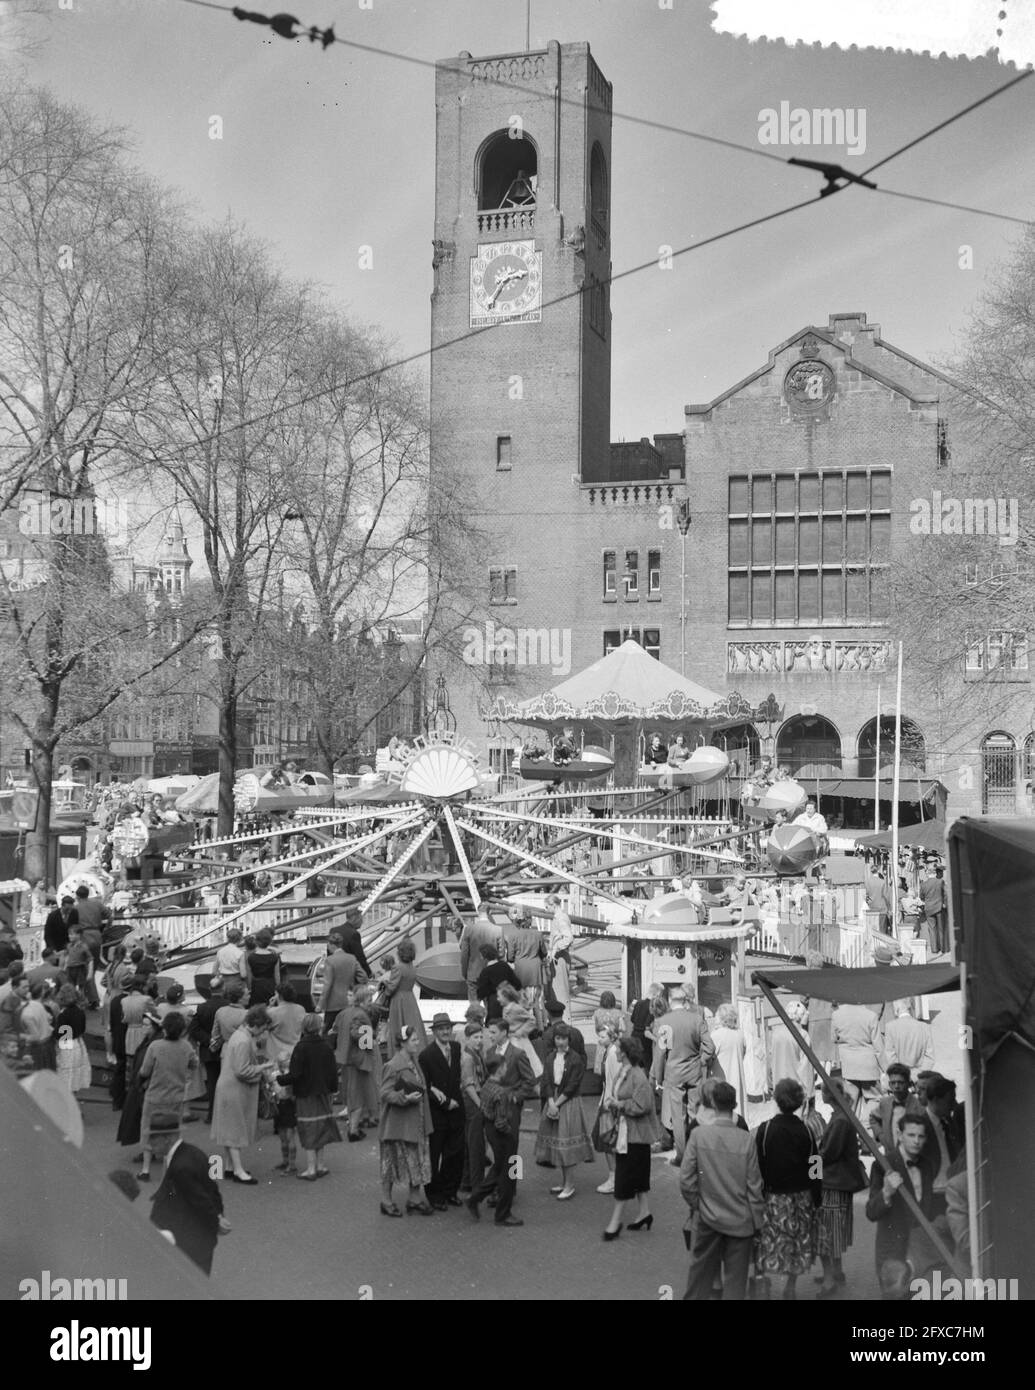 National holiday; fair at the Beursplein in Amsterdam, May 5, 1956, fairgrounds, The Netherlands, 20th century press agency photo, news to remember, documentary, historic photography 1945-1990, visual stories, human history of the Twentieth Century, capturing moments in time Stock Photo